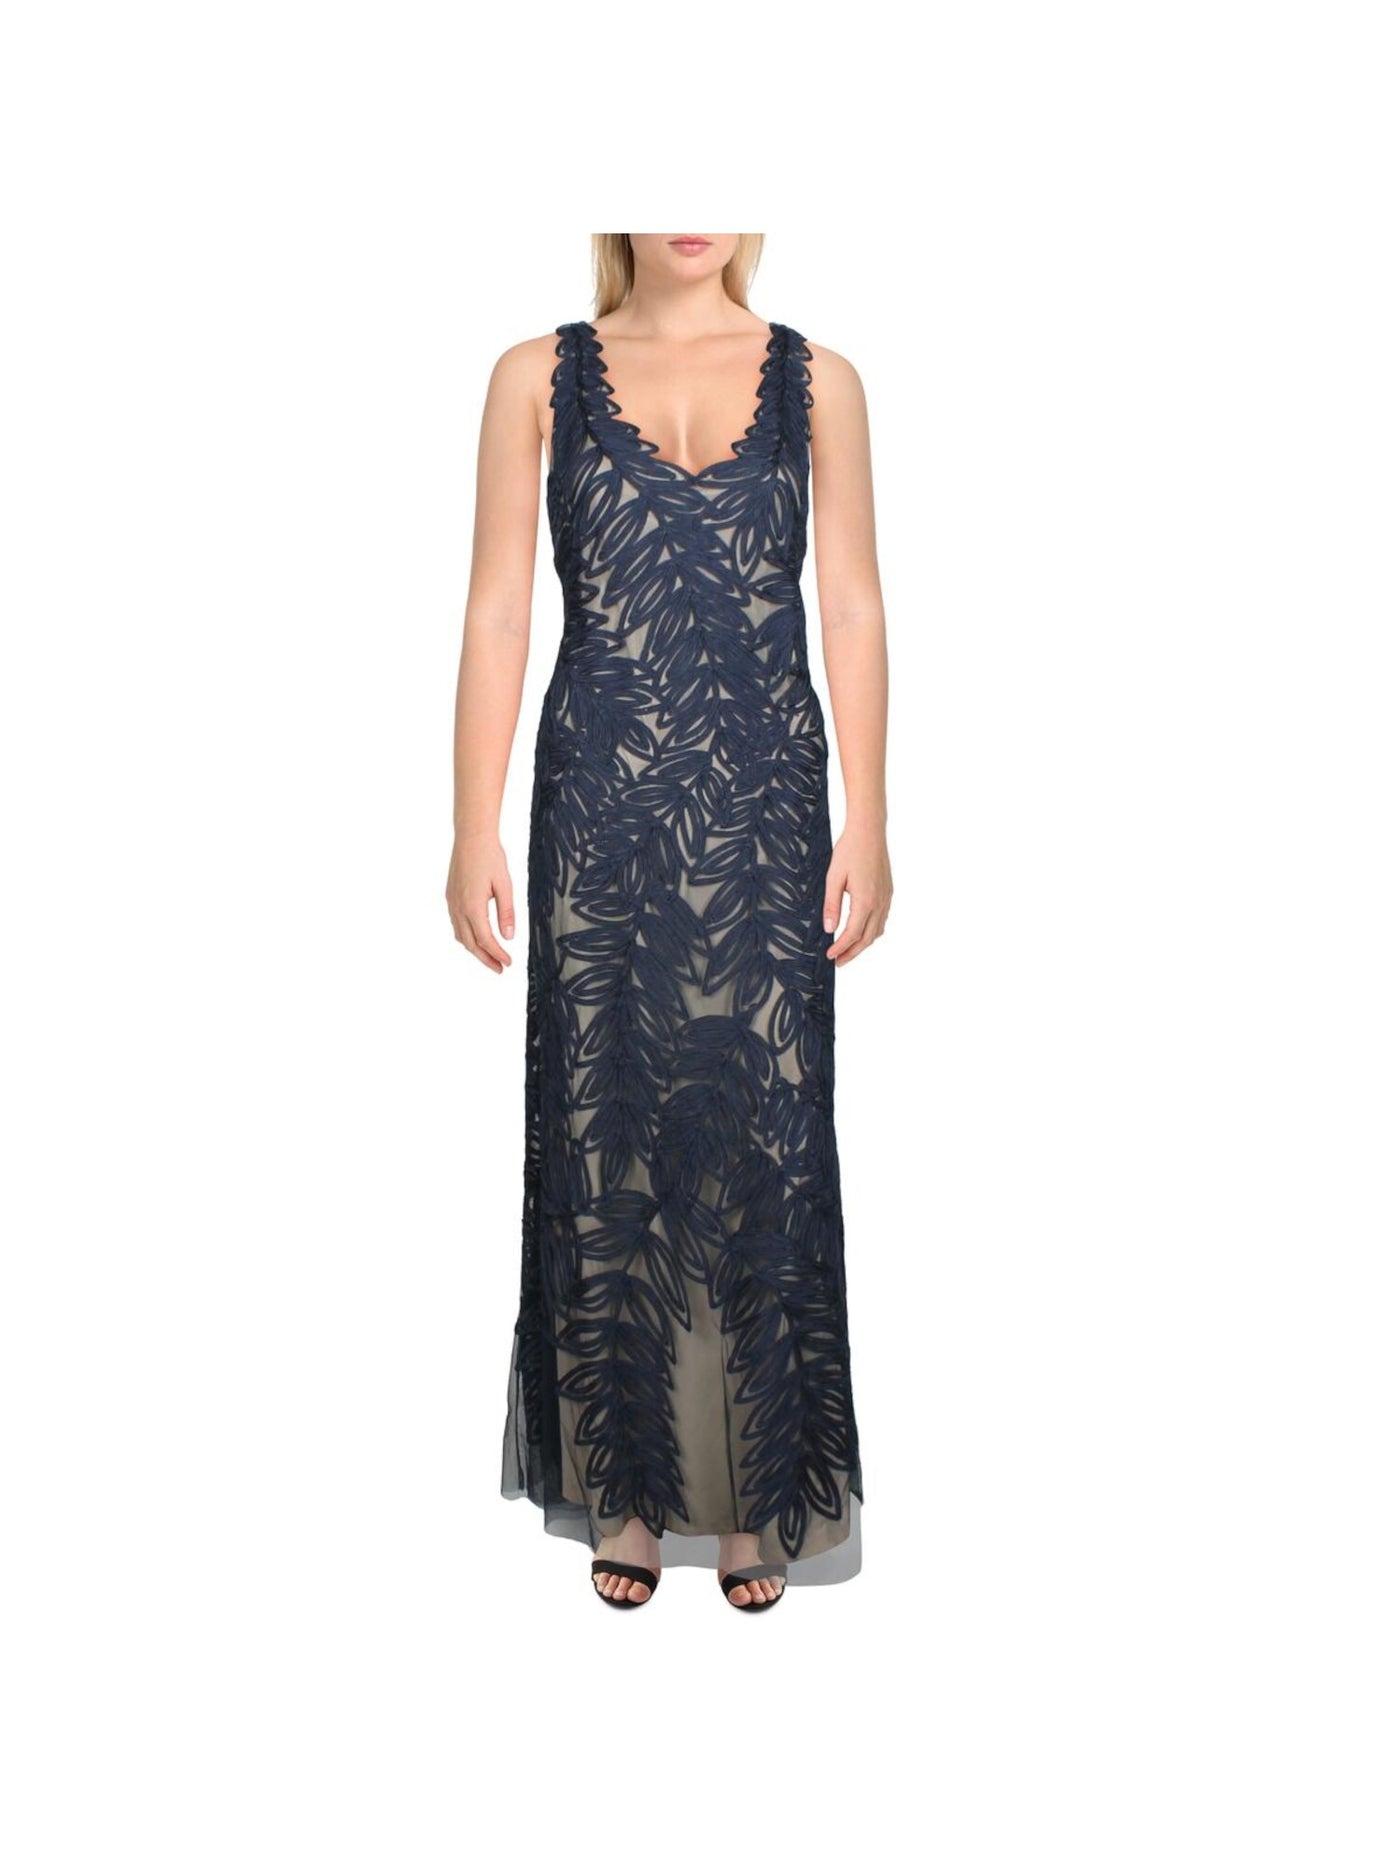 JS COLLECTION Womens Navy Embroidered Zippered Sleeveless V Neck Maxi Evening Shift Dress 8